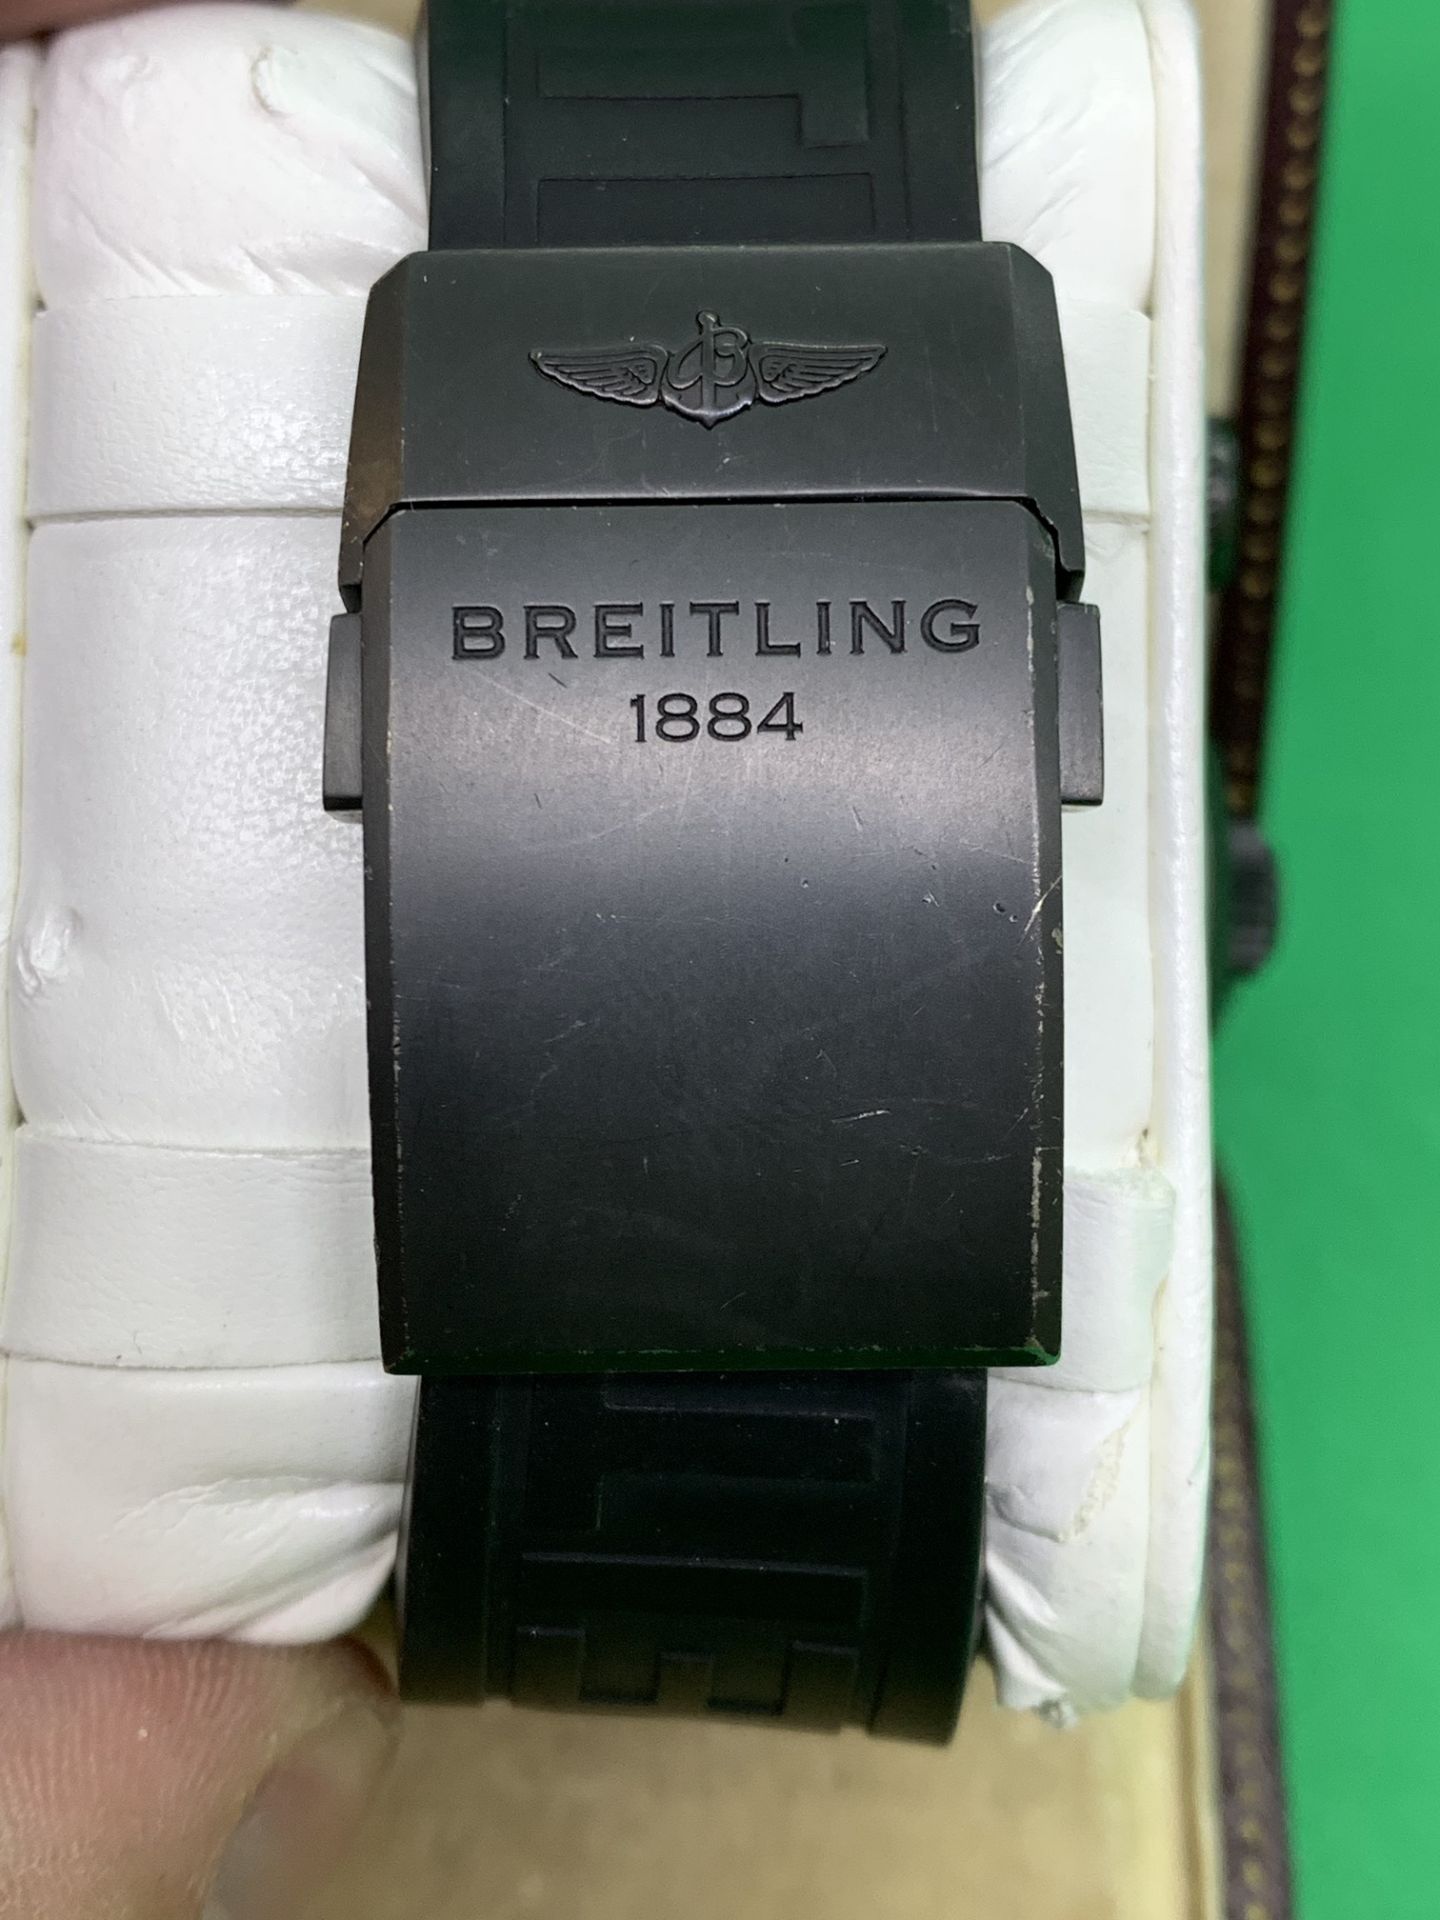 53mm BREITLING EMERGENCY WATCH - Image 5 of 6